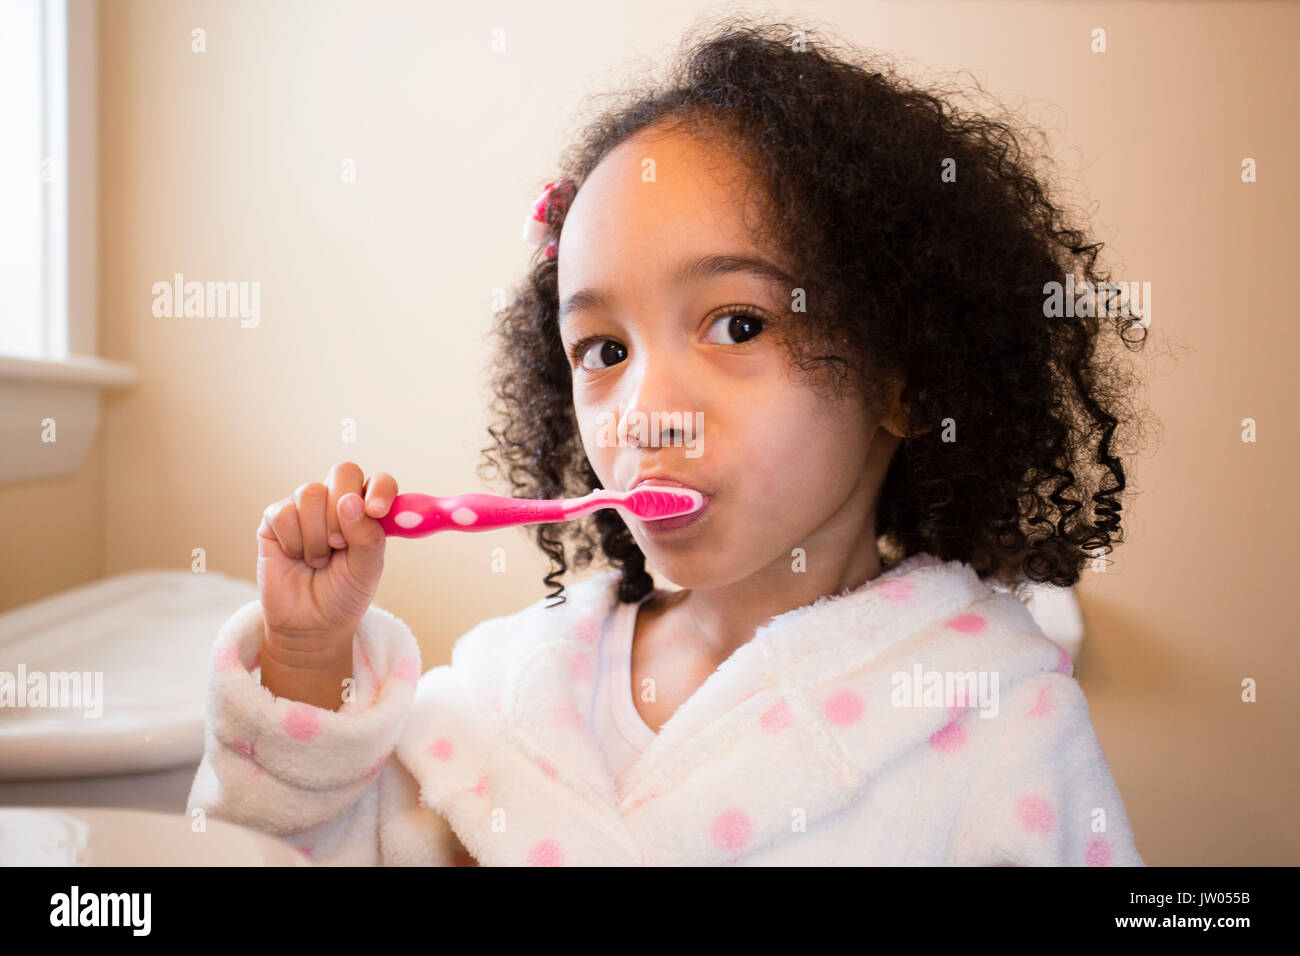 A young, multicultural girl brushes her teeth. Stock Photo